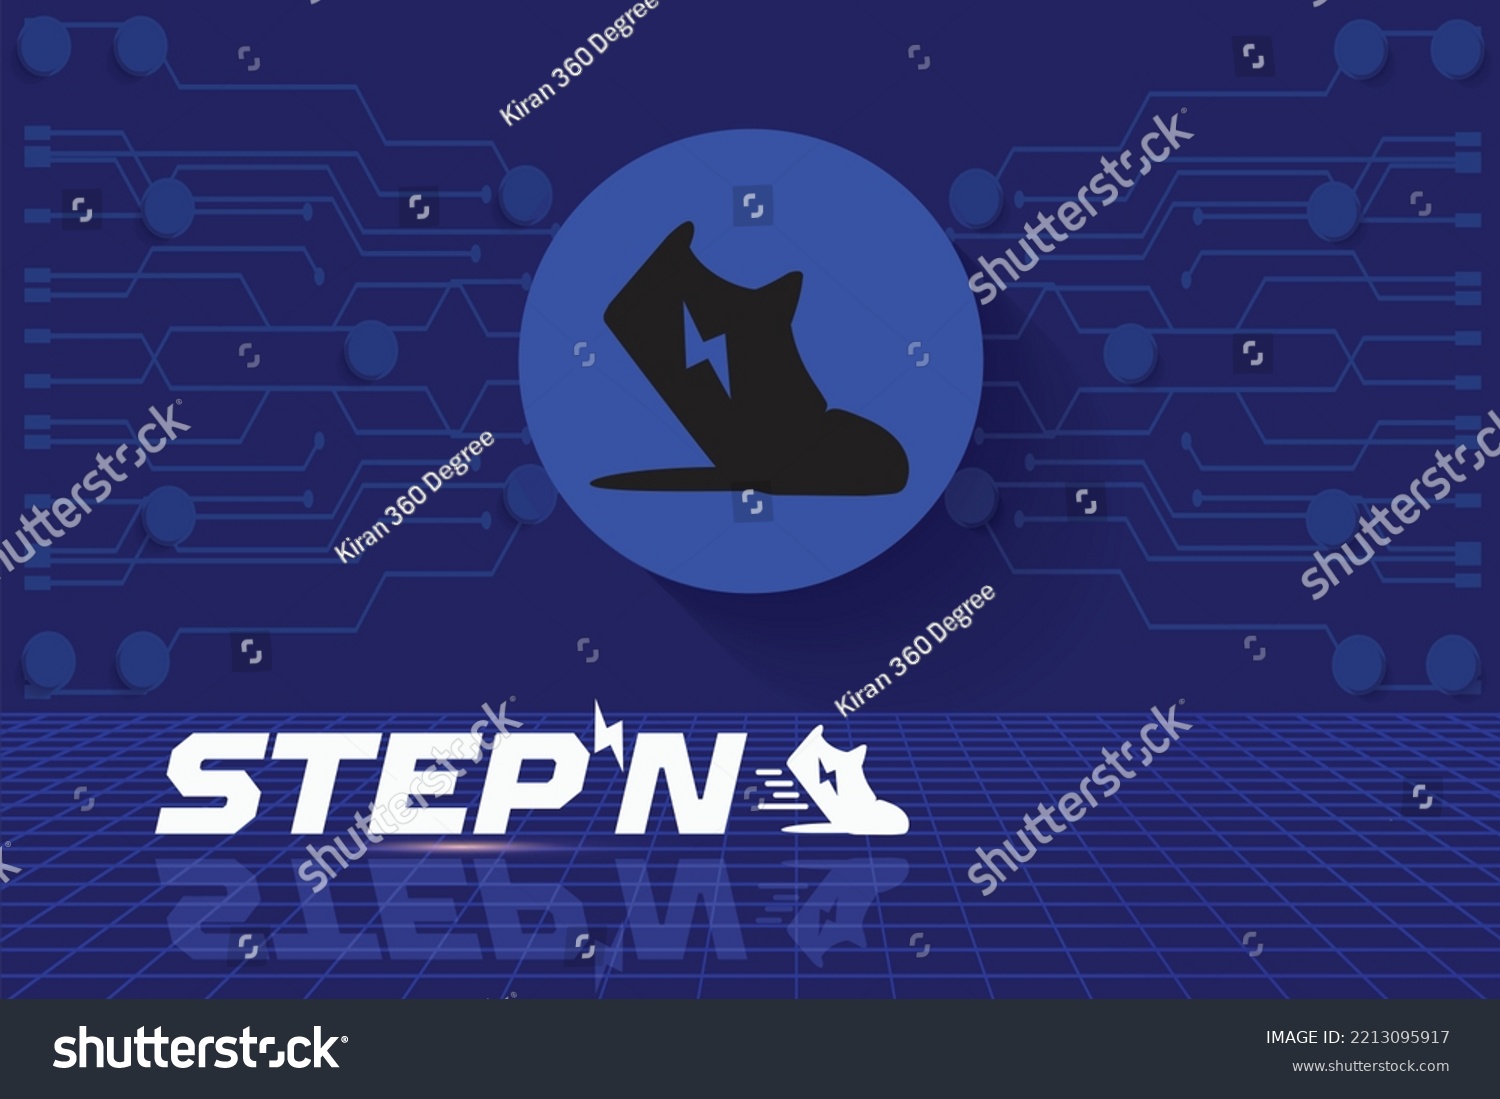 SVG of Stepn GMT crypto currency vector illustration block chain based symbol and logo on futuristic digital background. Decentralized money technology illustration. technology background and banner template svg